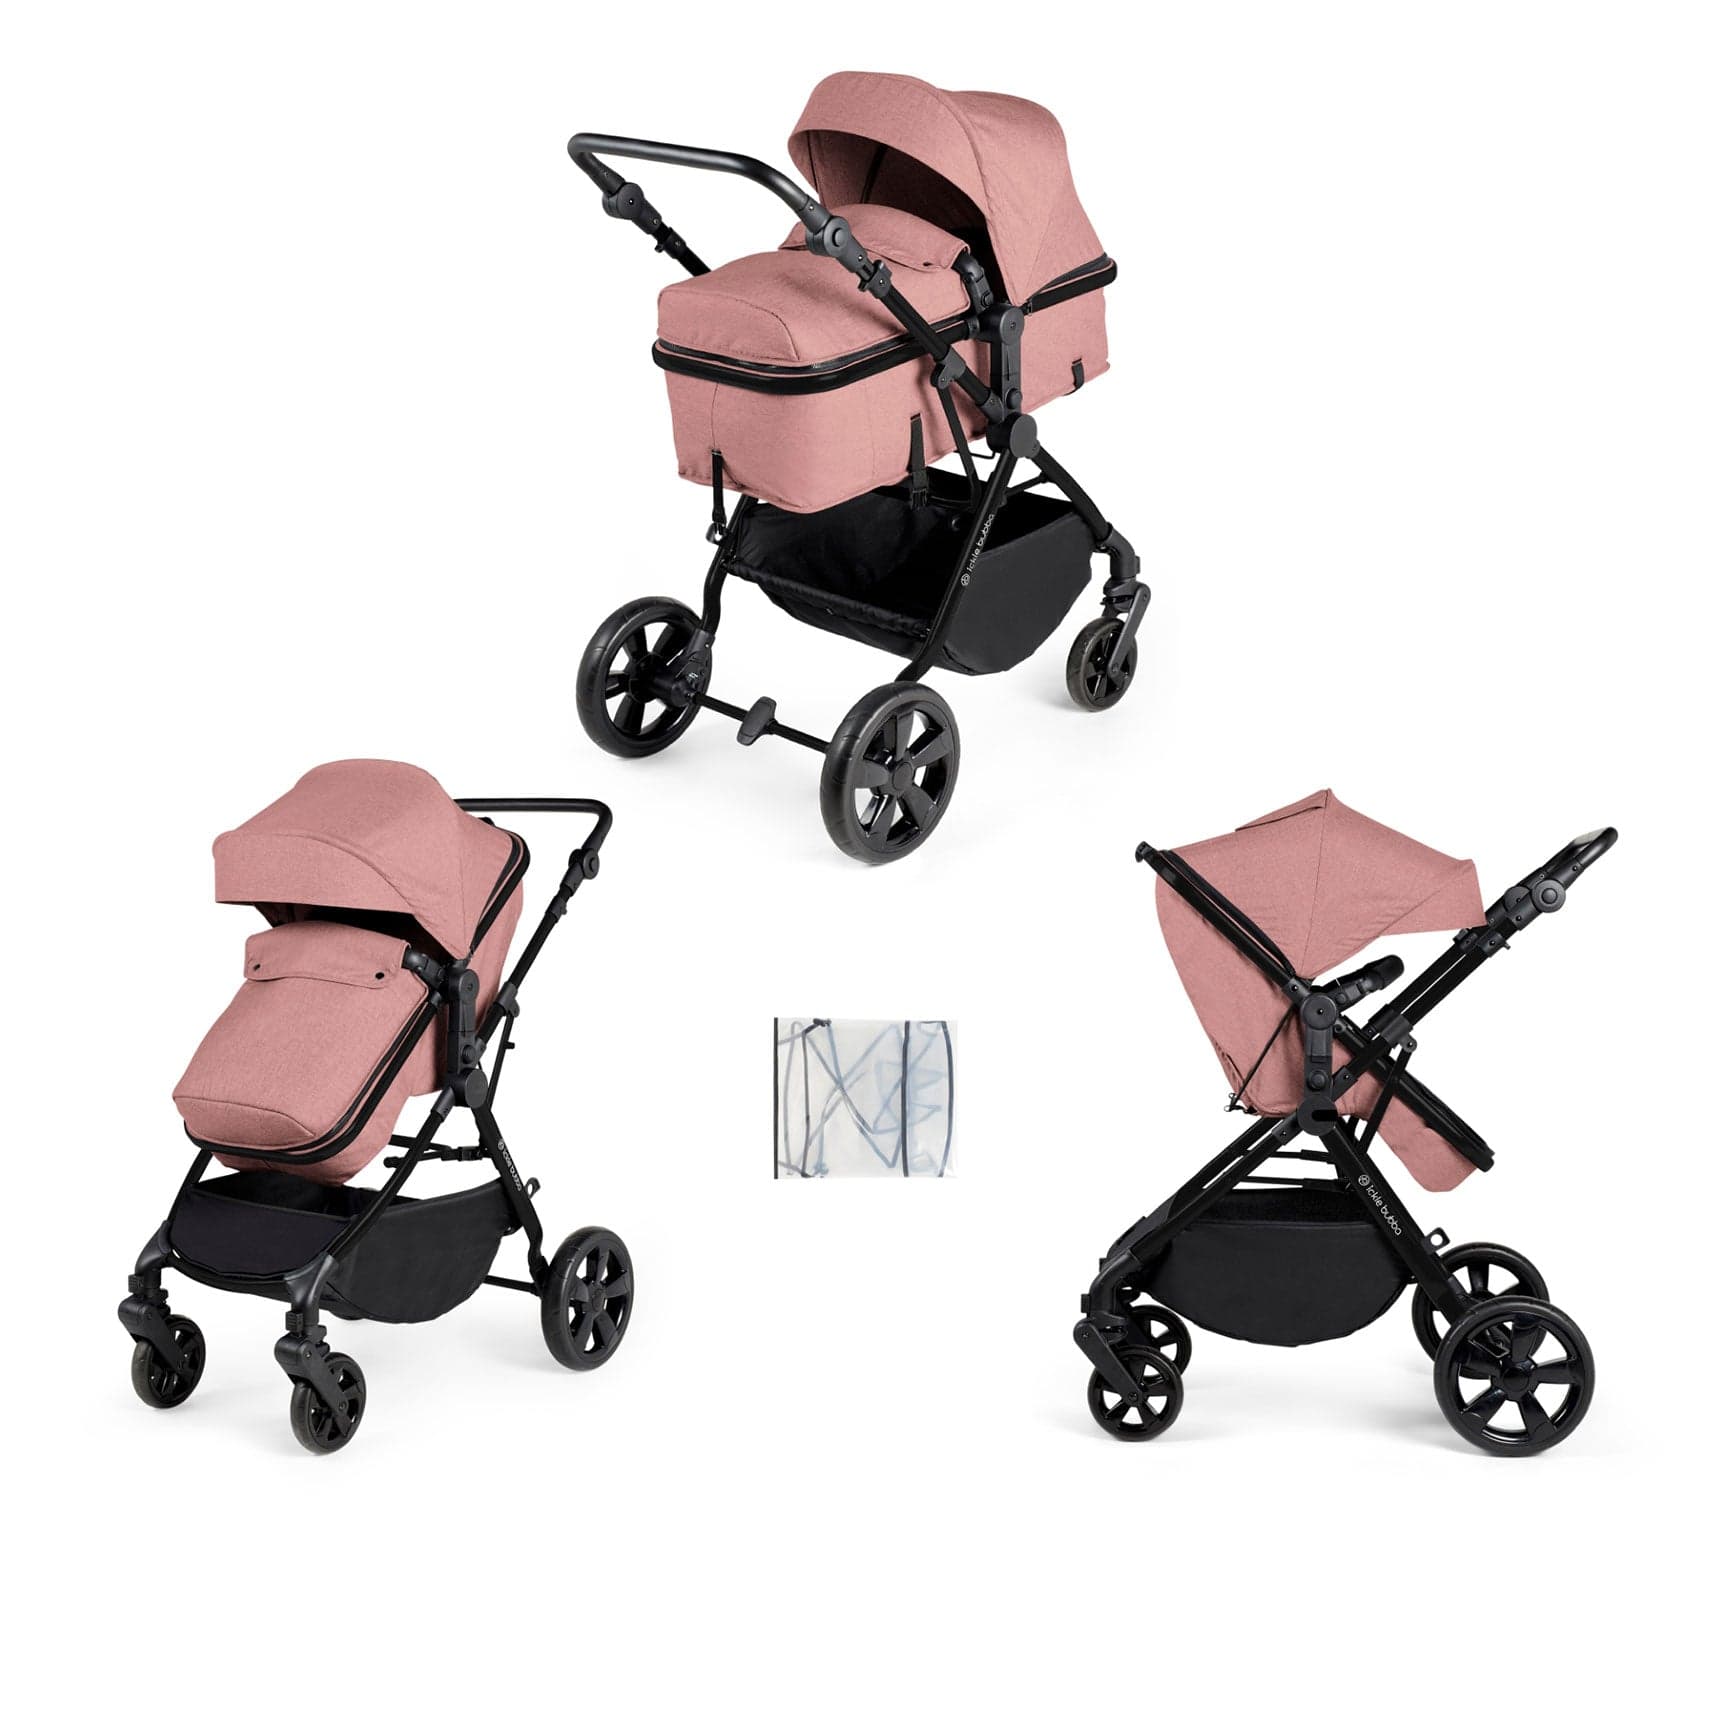 Ickle Bubba baby prams Ickle Bubba Comet 2-in-1 Plus Carrycot & Pushchair - Dusty Pink 10-008-001-134